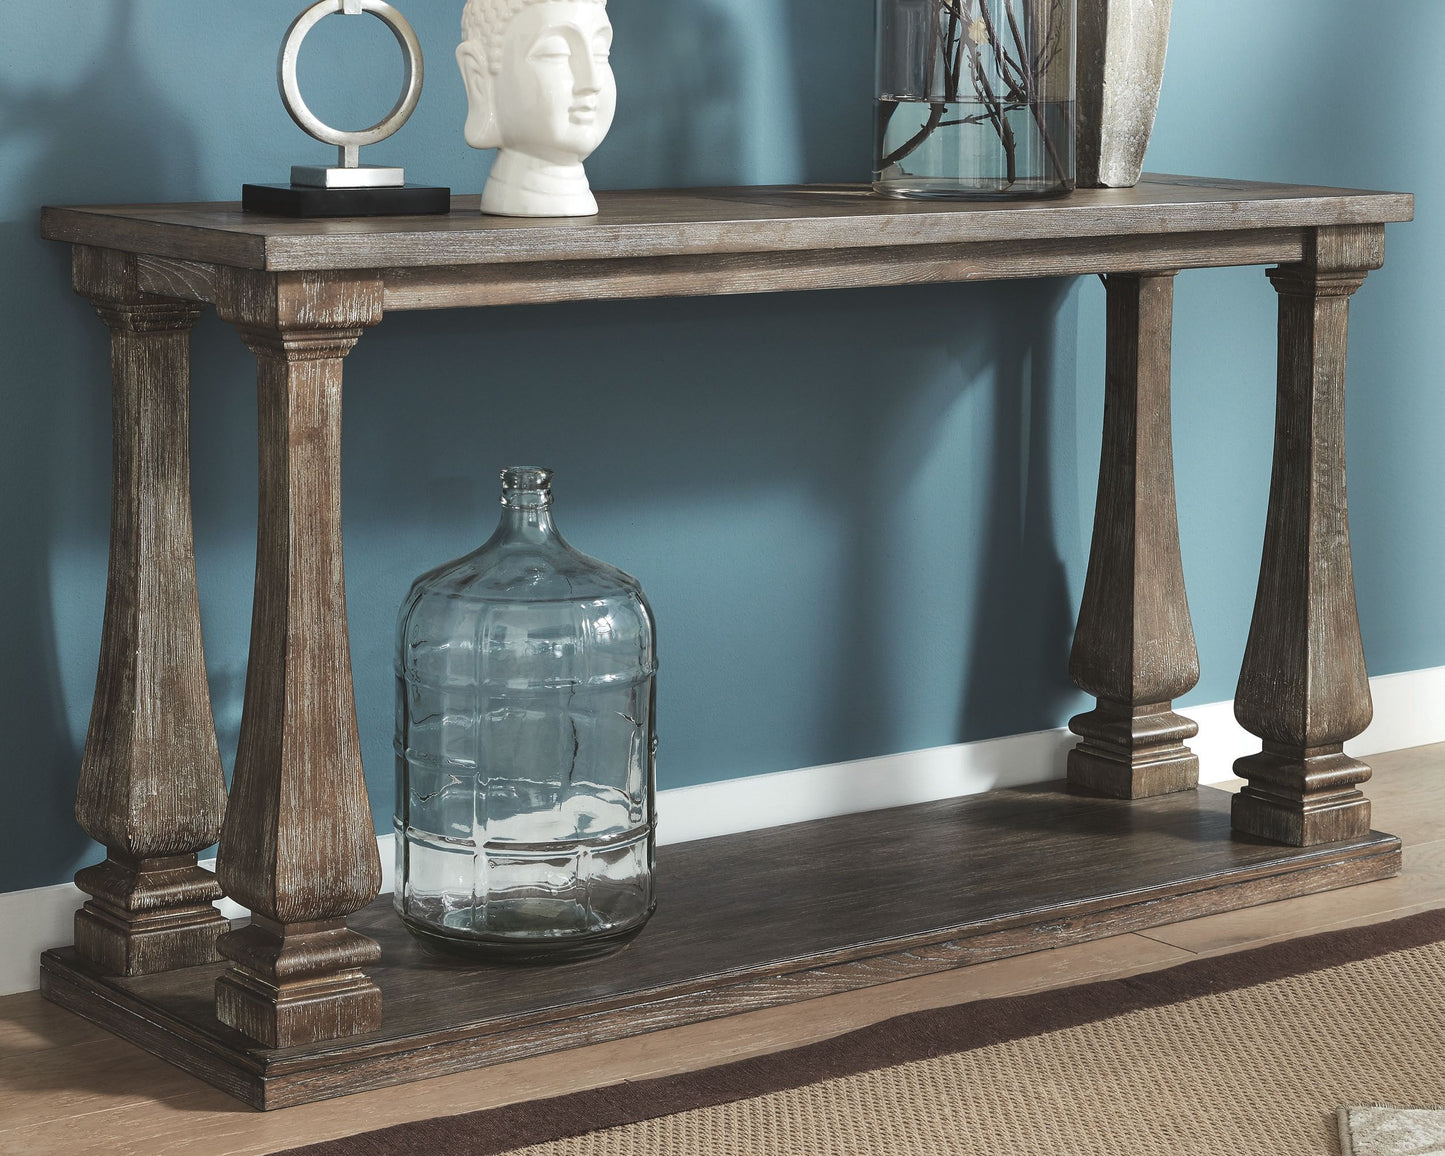 Johnelle - Gray - Sofa Table